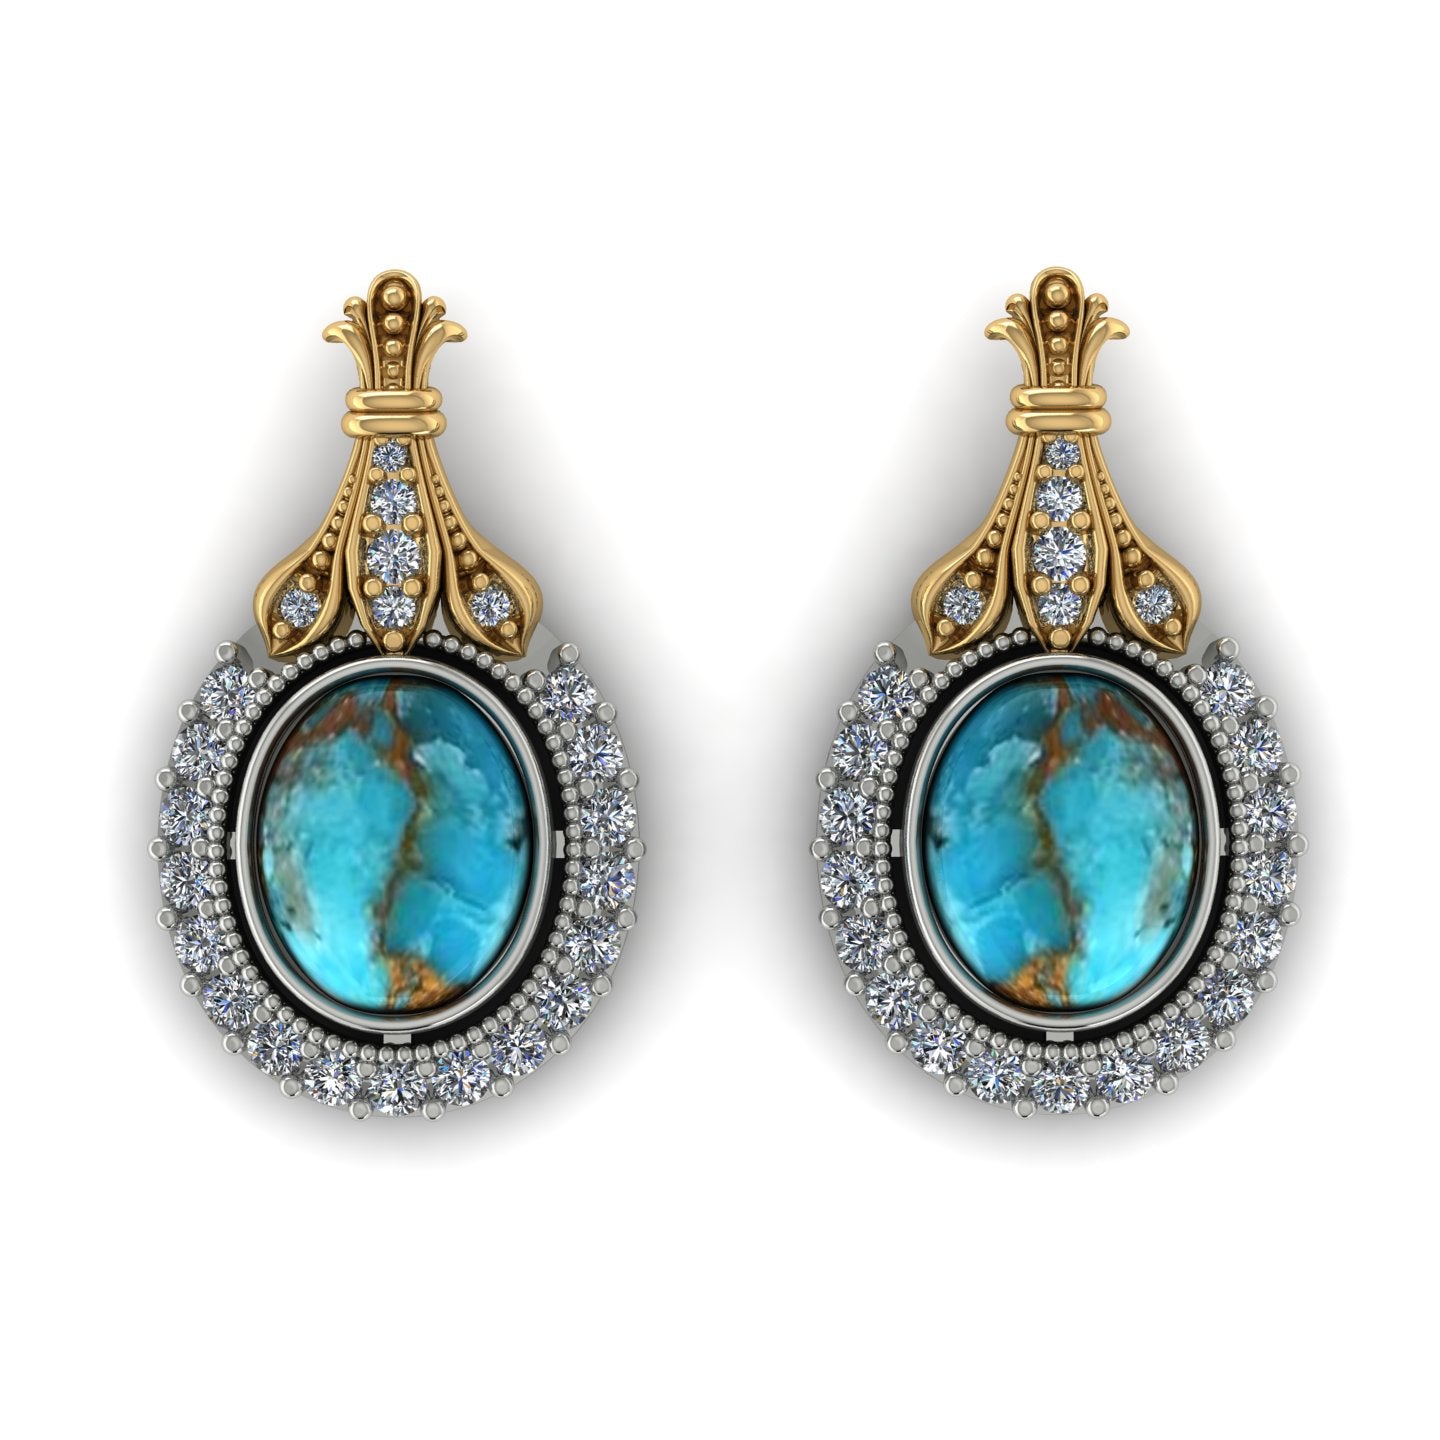 Turquoise and diamond earrings in 14k yellow and white gold